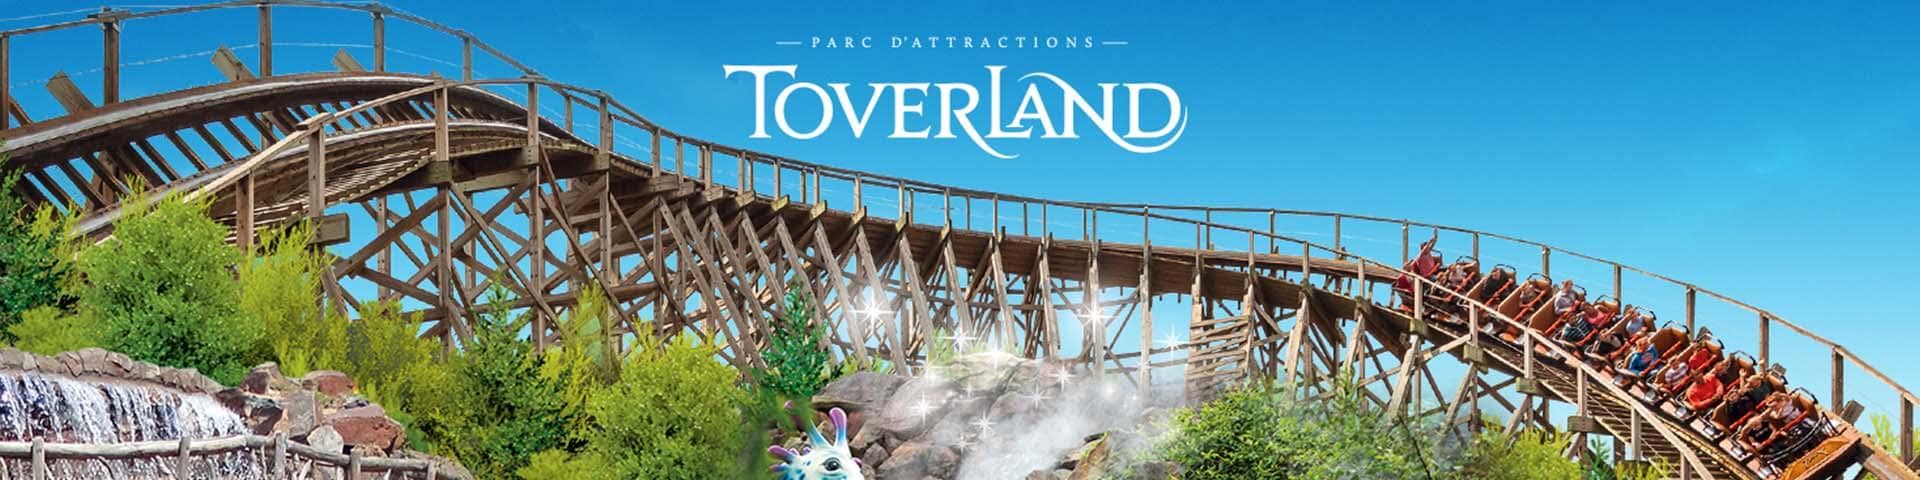 Parc attraction Toverland